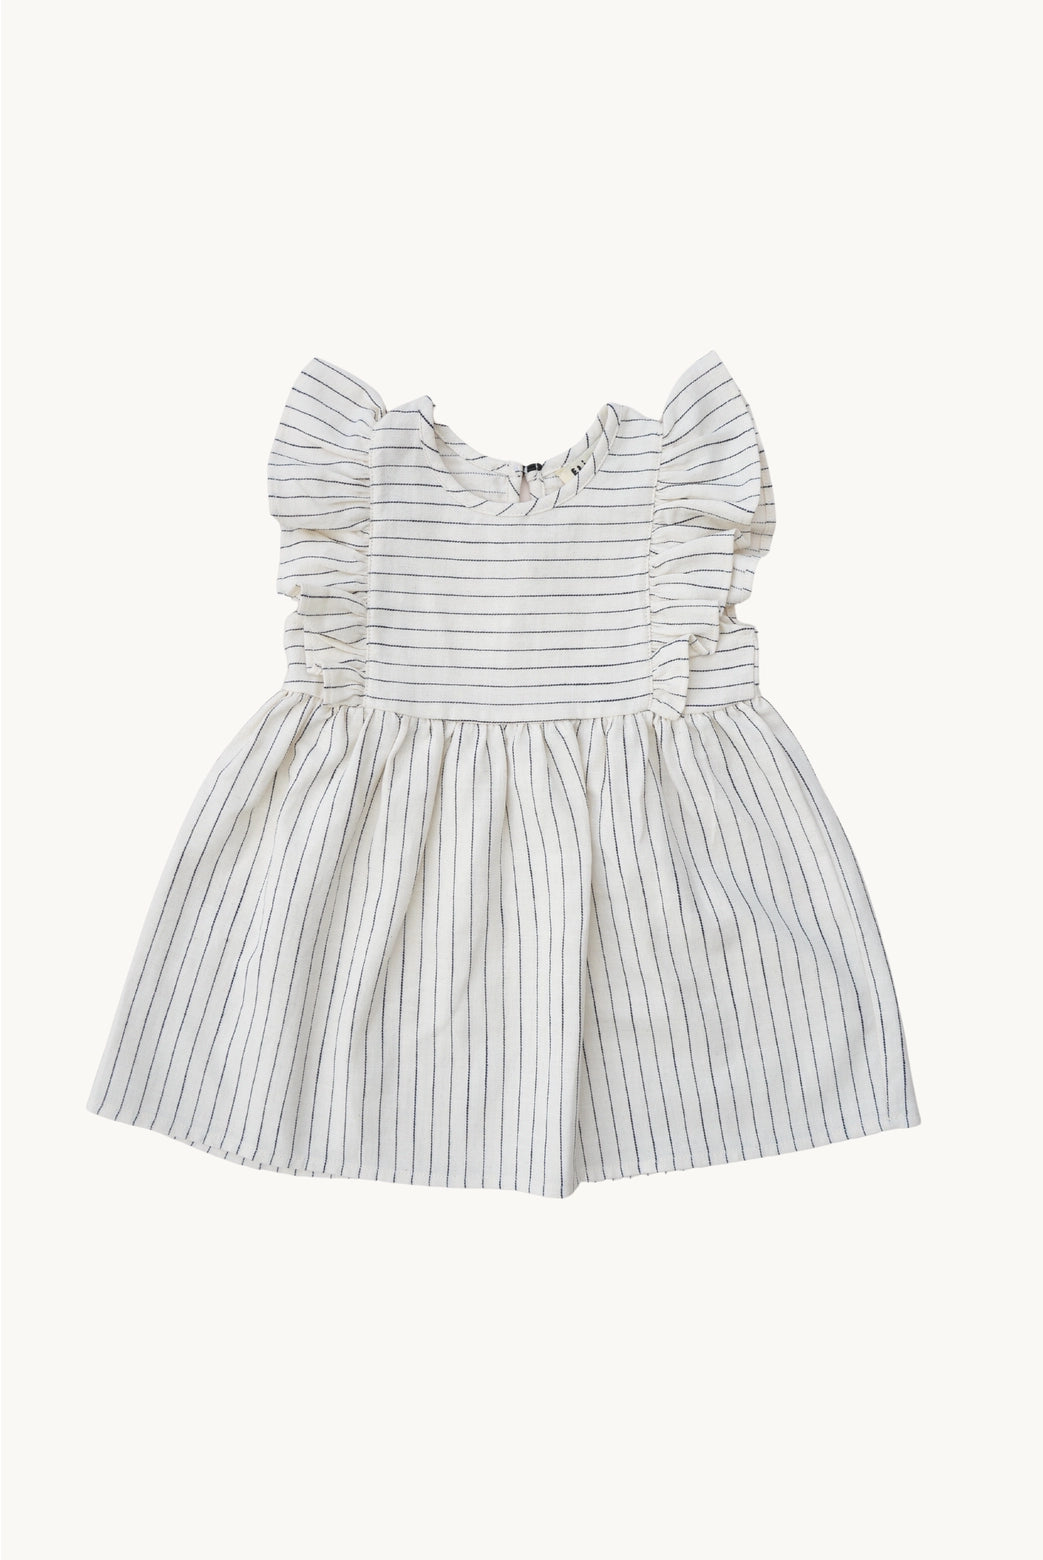 Eli & Nev Baby Girl Dina Summer Dress - Stripes (100% Cotton) cream and navy stripe dress best seller twin outfit